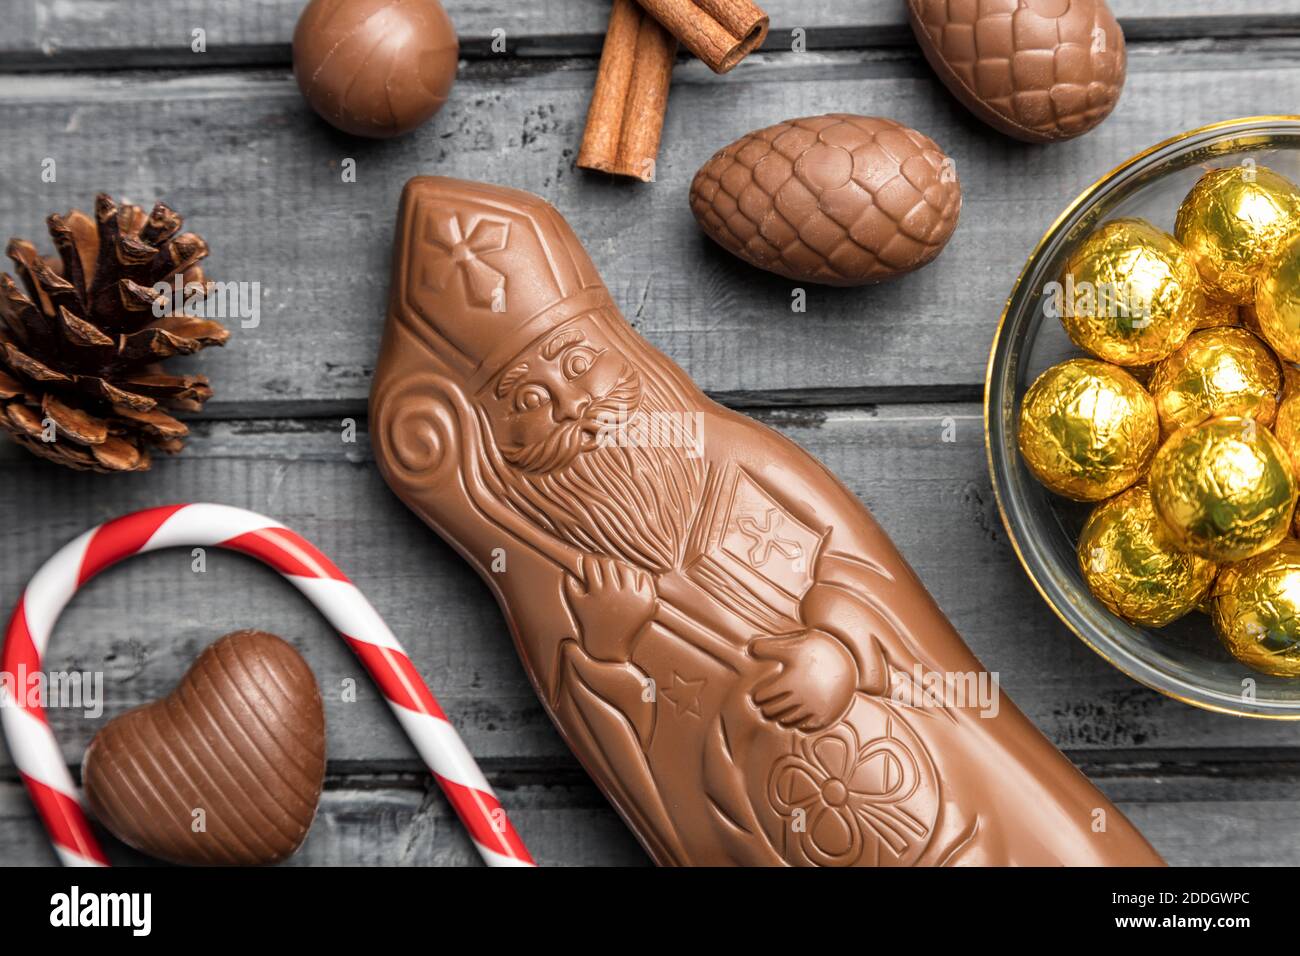 Delicious festive Christmas chocolate and sweets for the holiday period Stock Photo